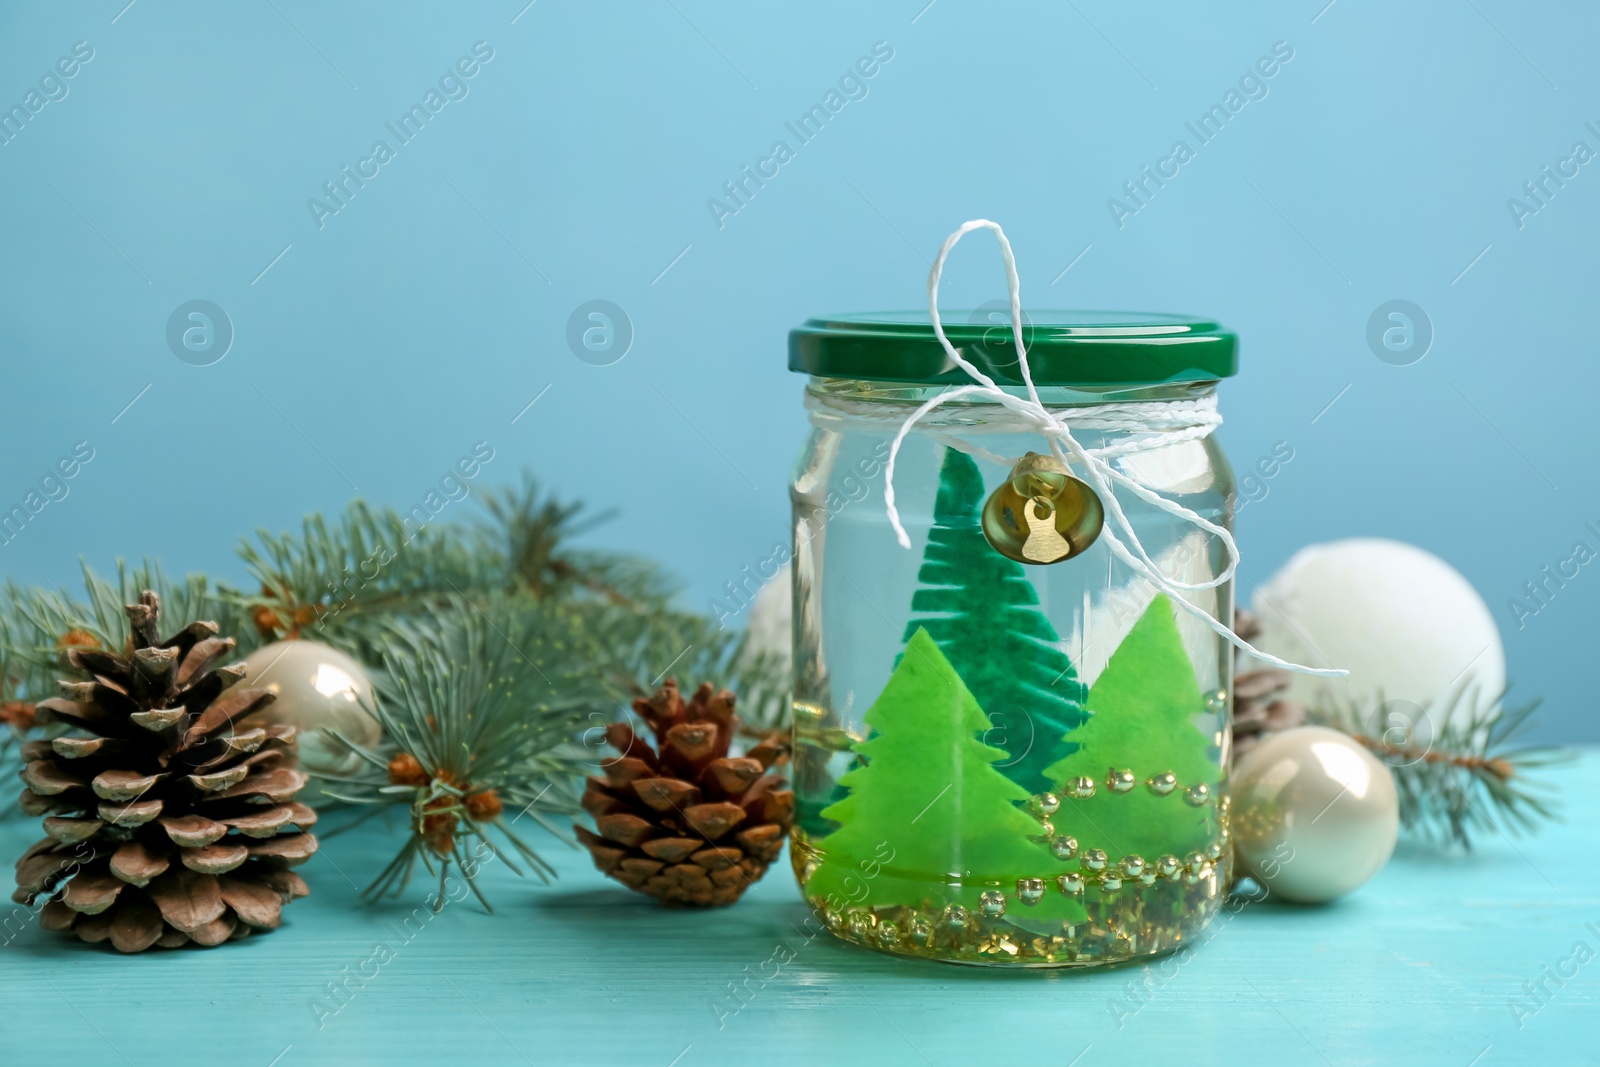 Photo of Handmade snow globe and Christmas decorations on light blue background